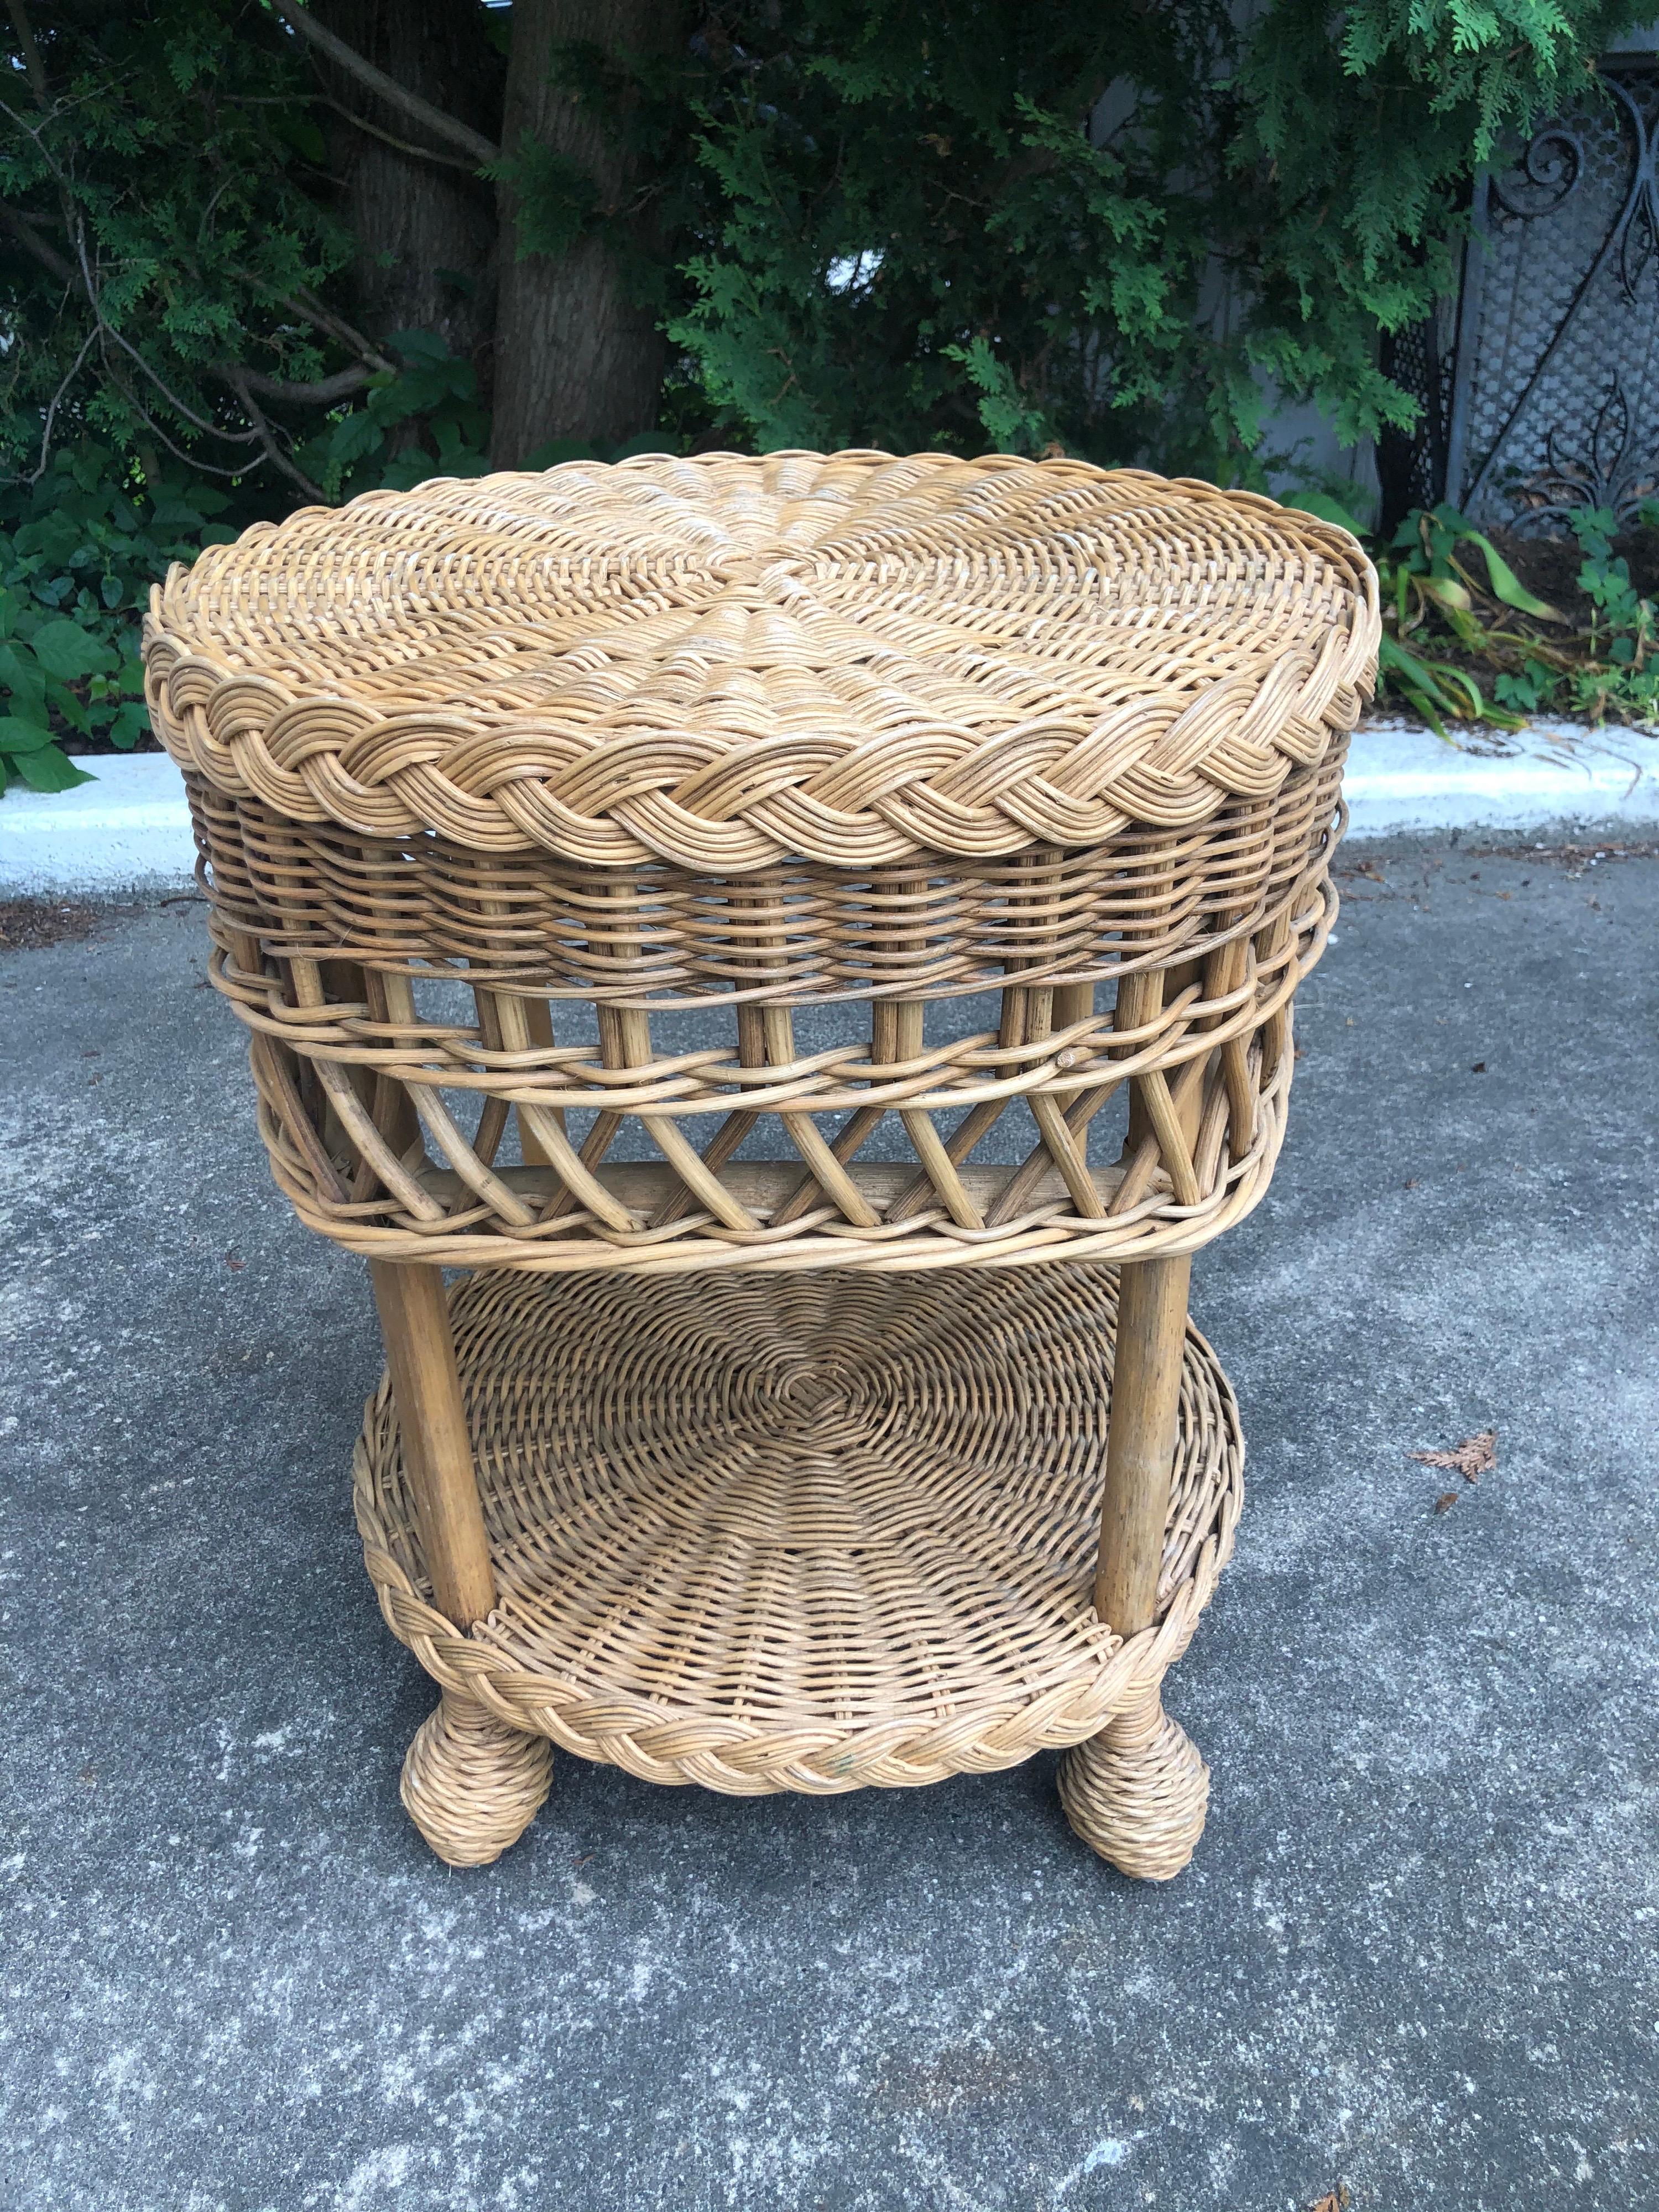 This item has sold 

Two tiered wicker side table. Perfect for that indoor porch or covered patio.
This itetm can parcel ship for around $45